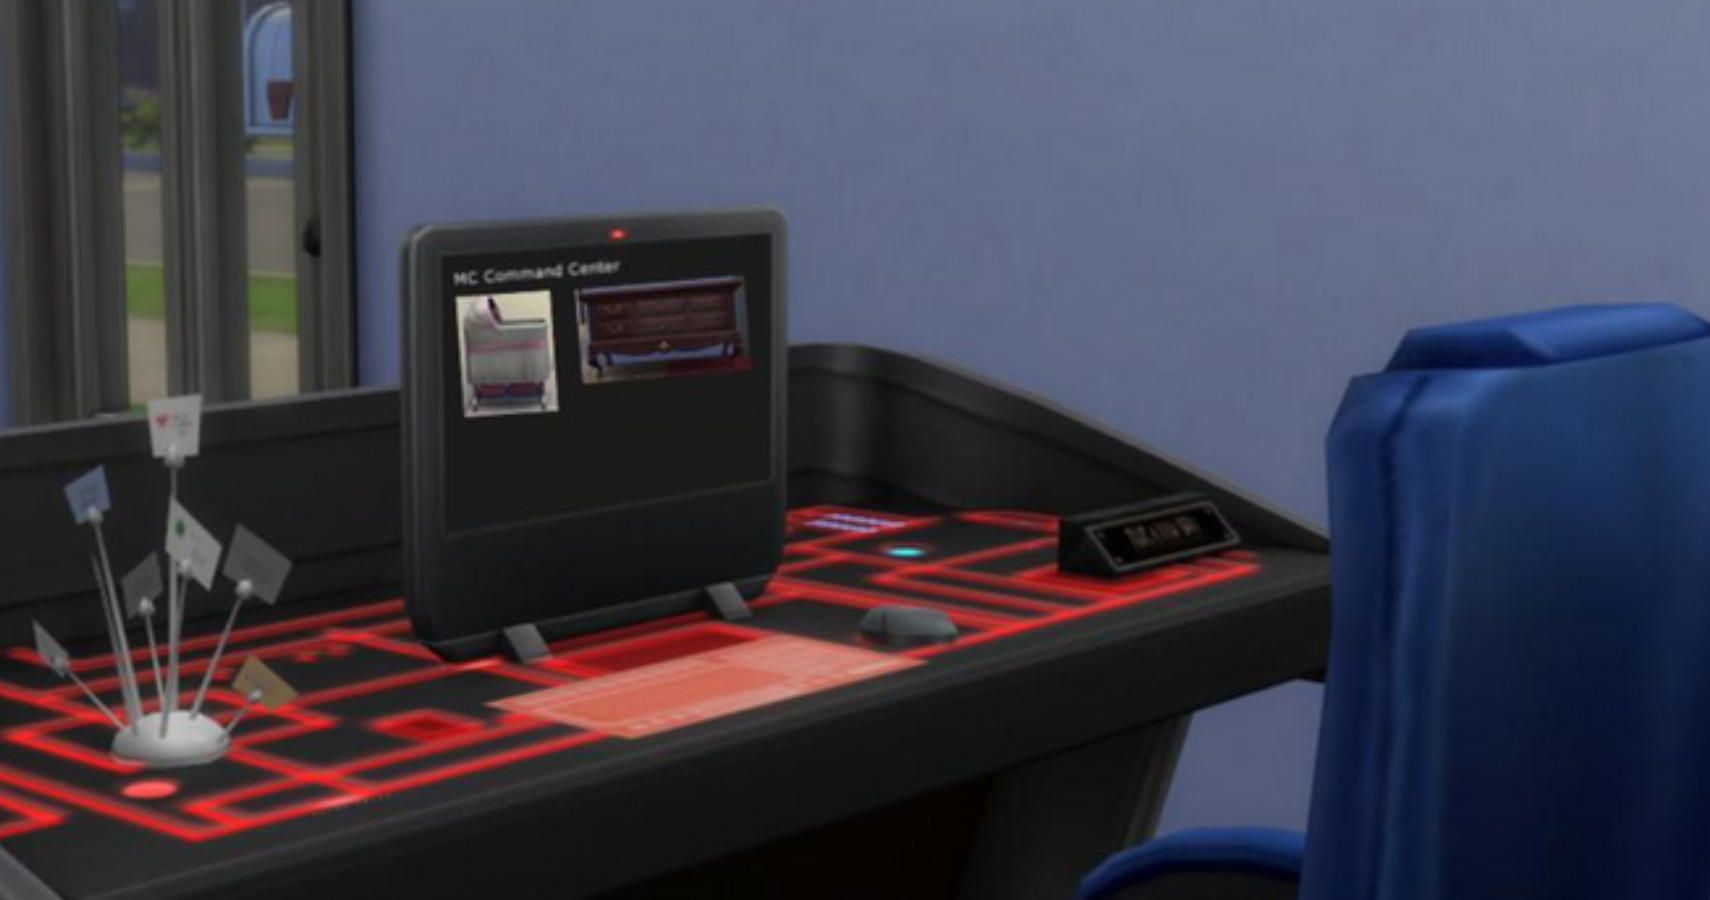 MCCC shown on a sims 4 pc.